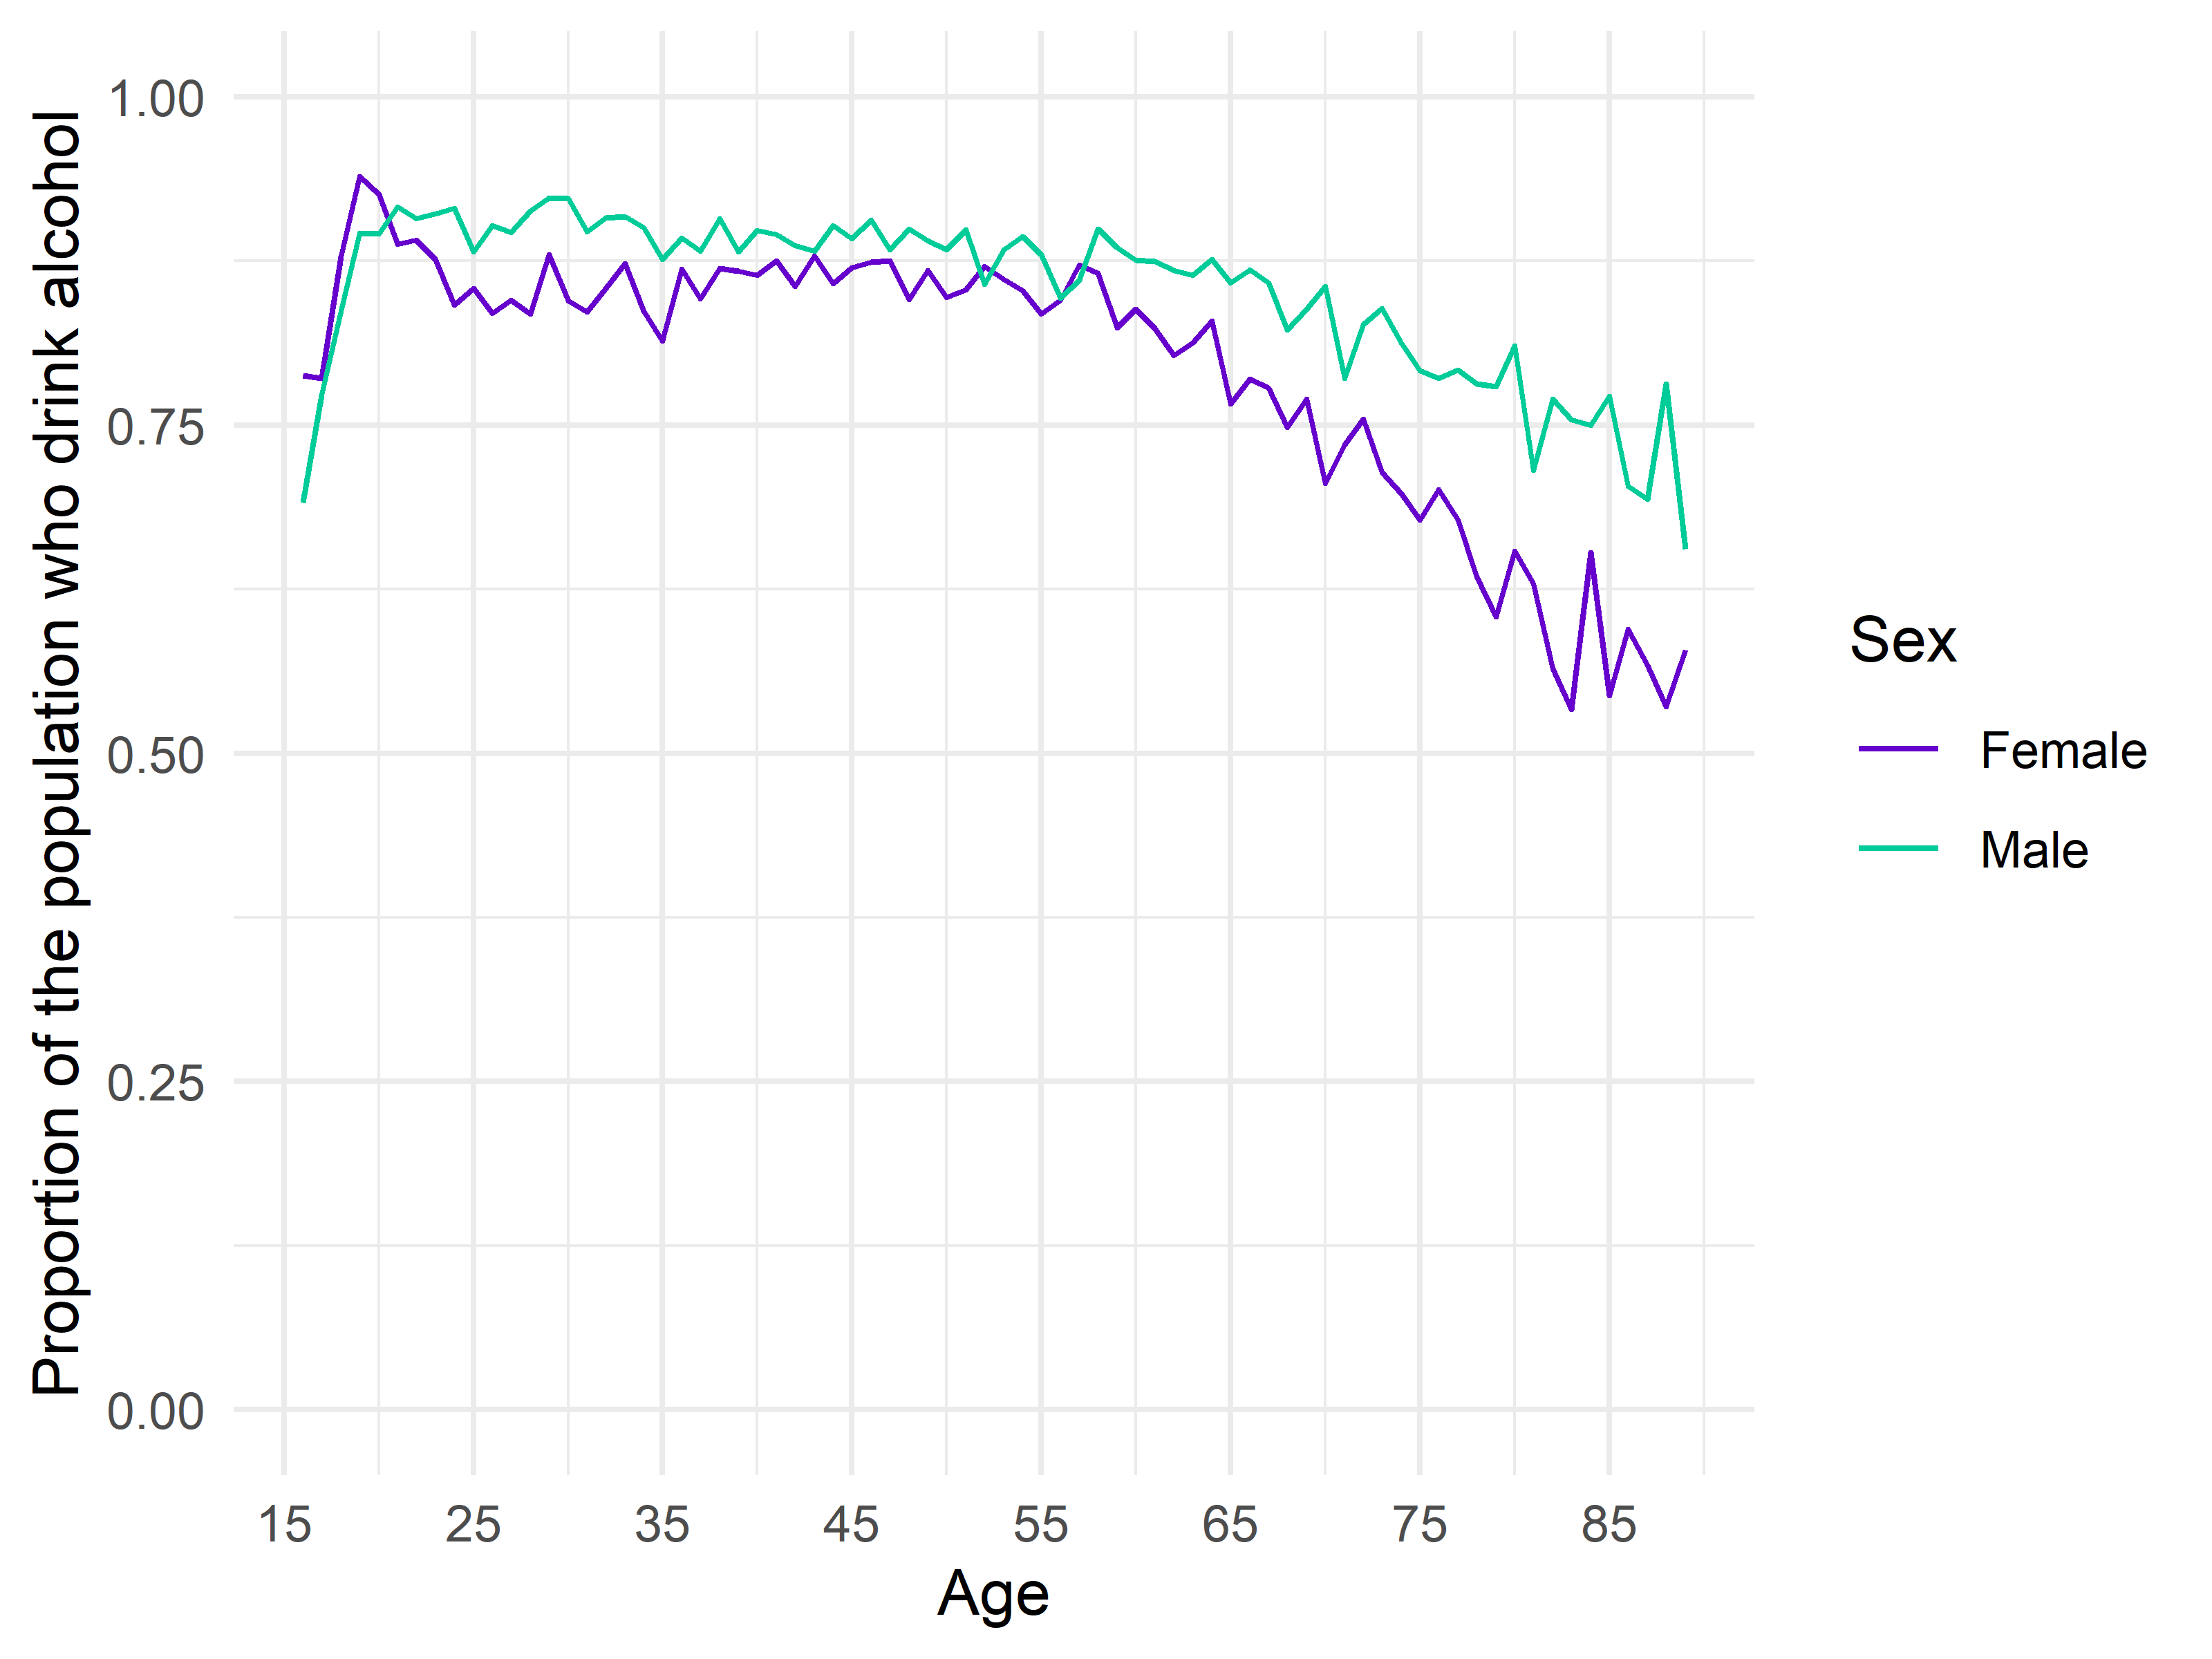 Figure 12. Sex specific age trends in the proportion of people who drink alcohol.